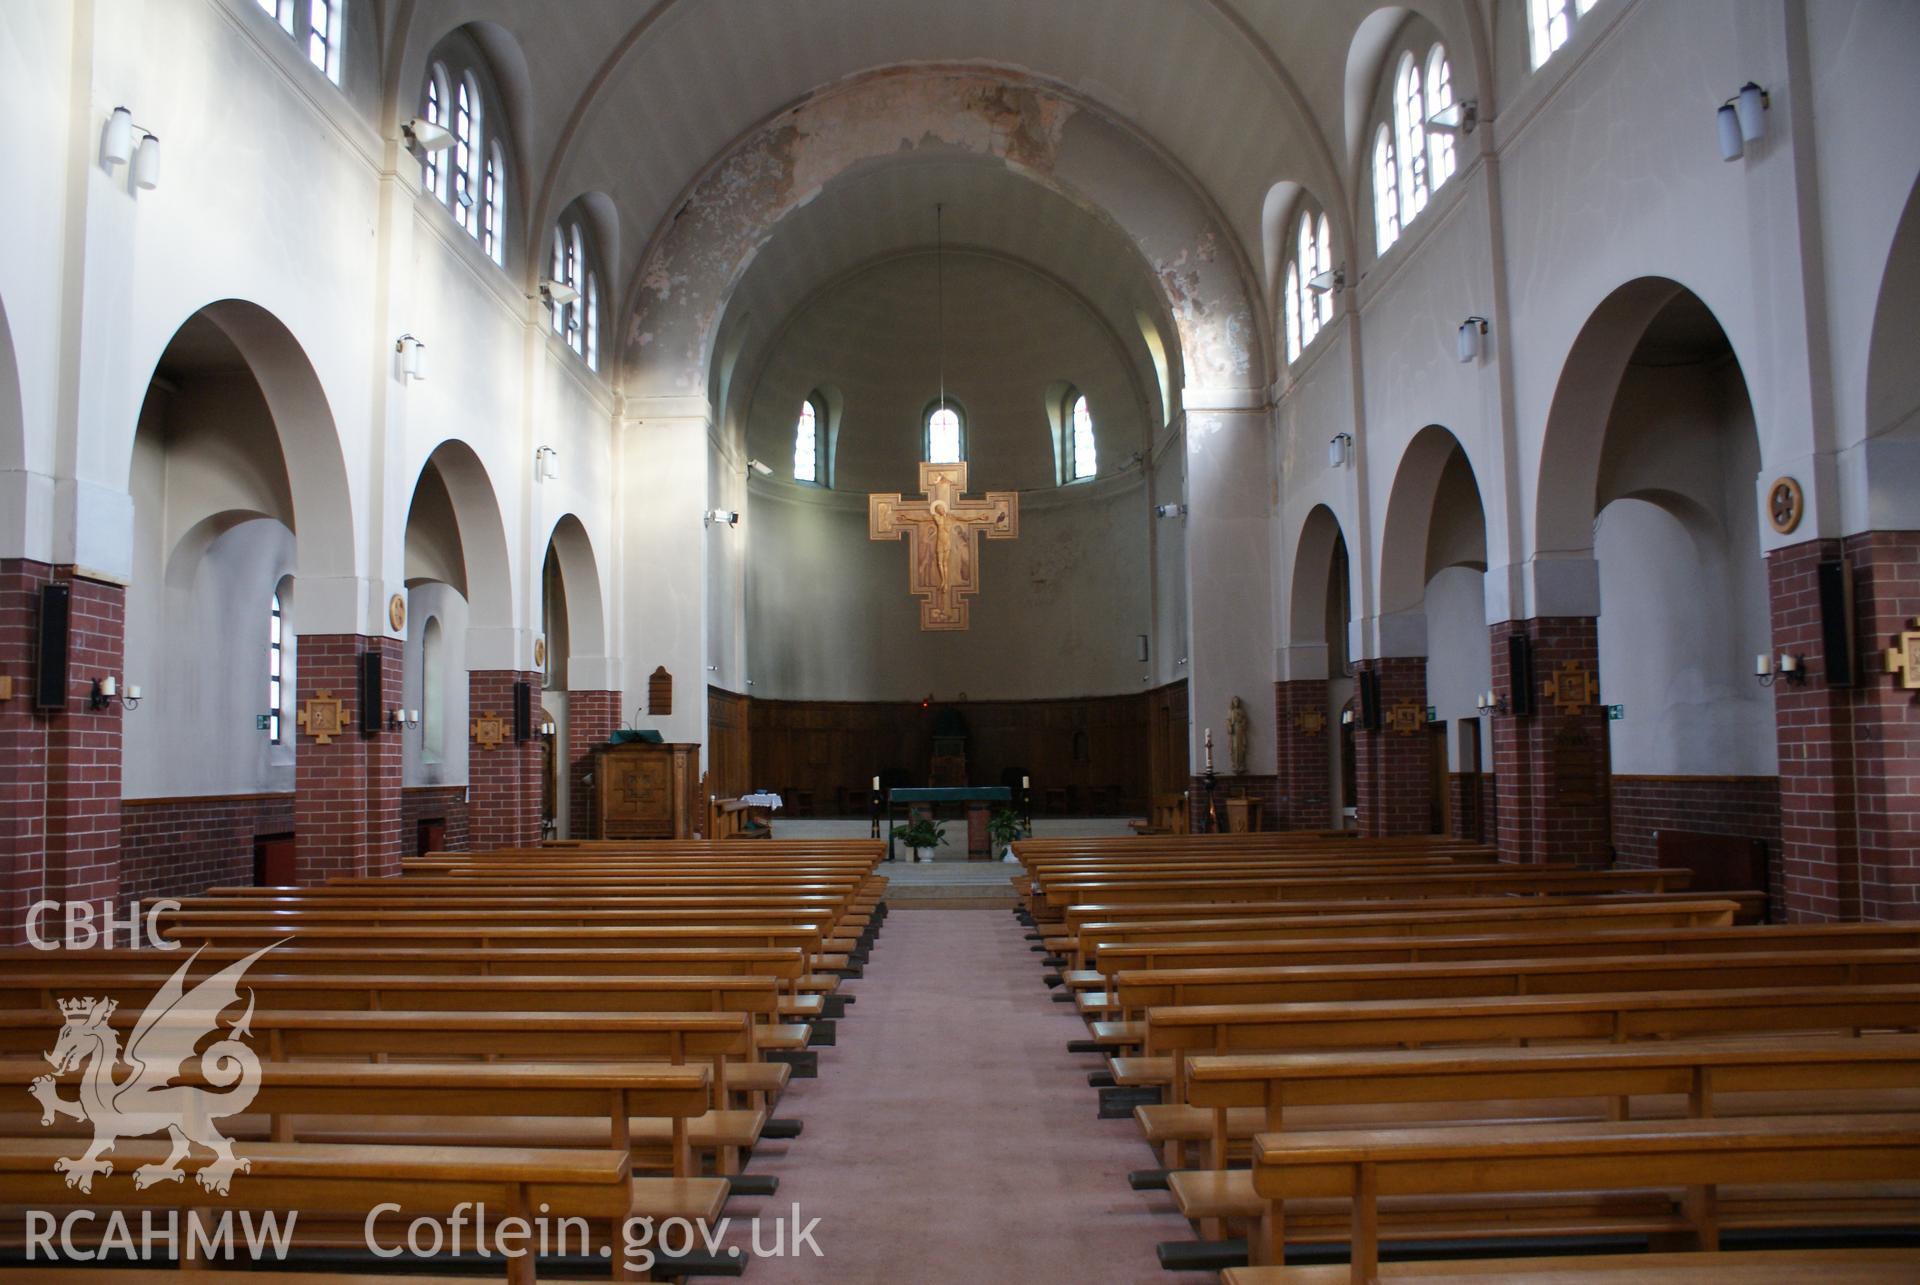 Digital colour photograph showing interior of St Dyfrig's Catholic church, Treforest.